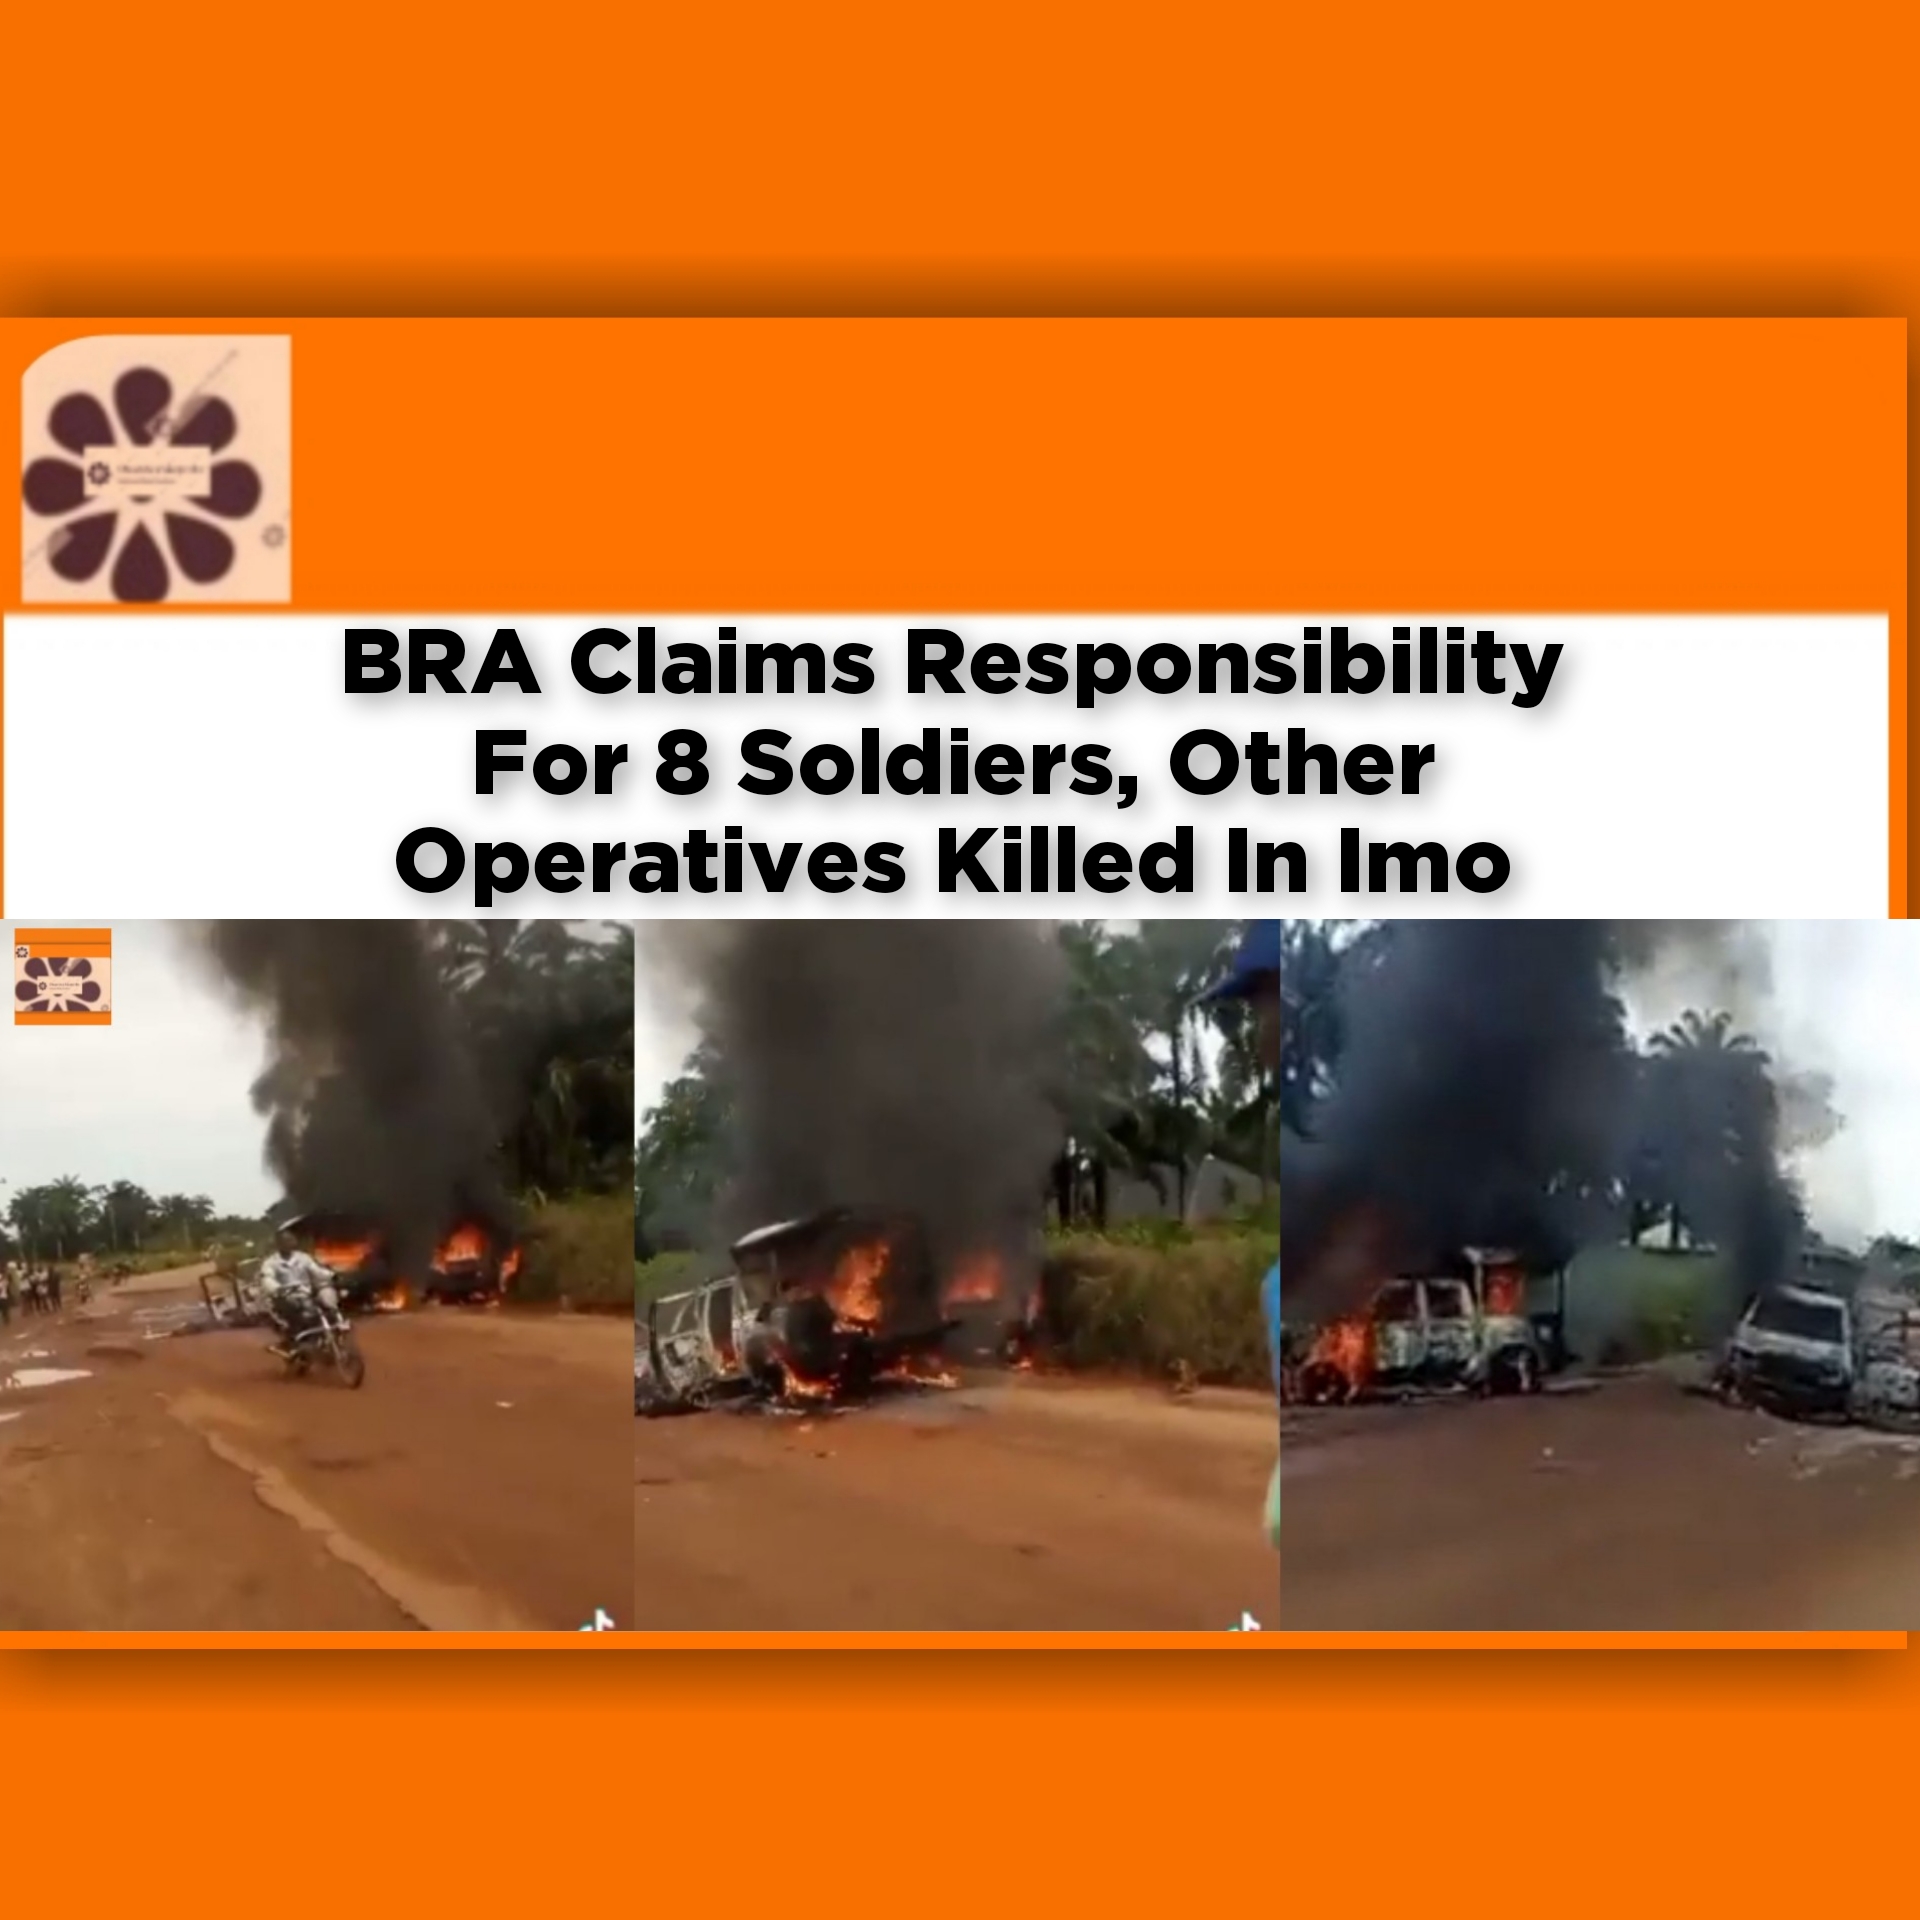 BRA Claims Responsibility For 8 Soldiers, Other Operatives Killed In Imo ~ OsazuwaAkonedo #Yemi